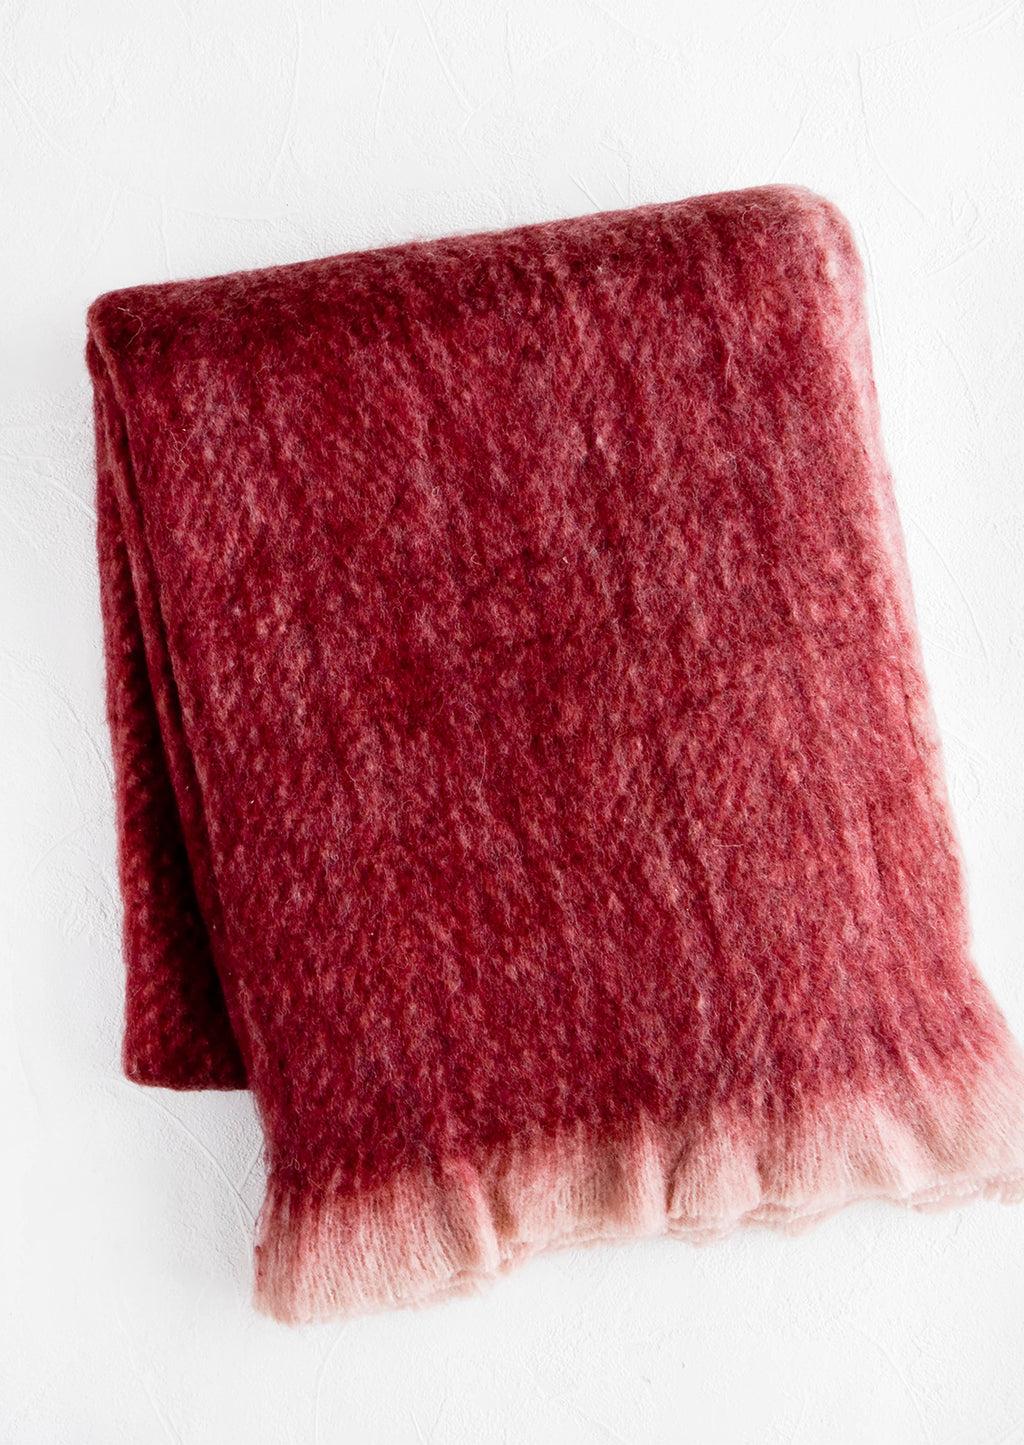 2: Fuzzy, mohair-like throw blanket in wine red with faded fringe trim